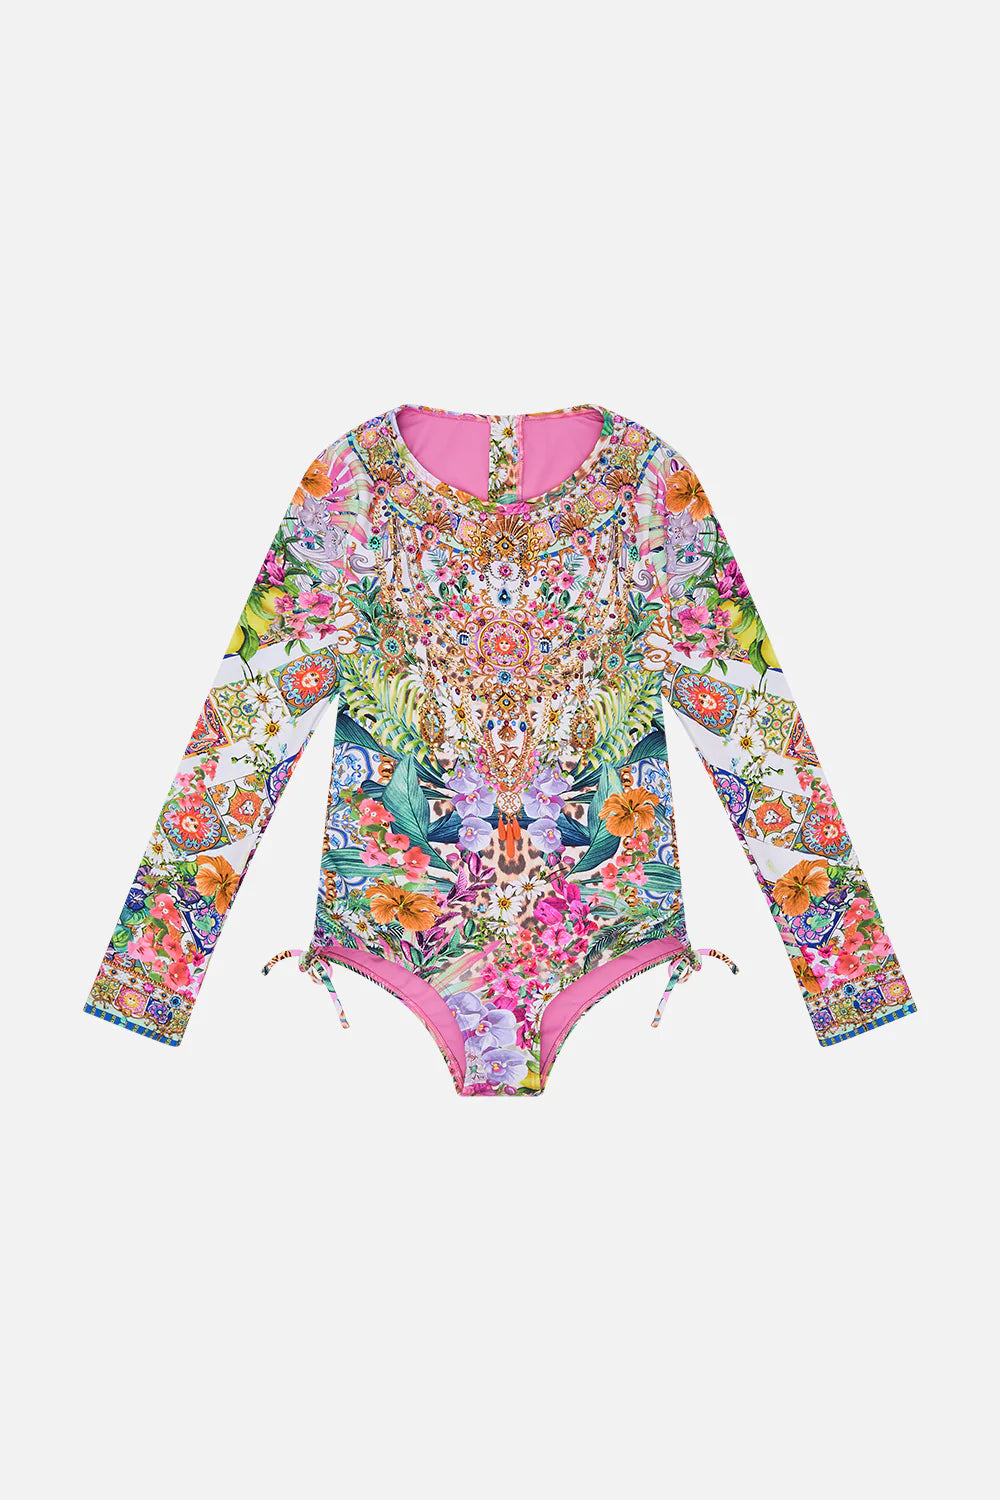 Camilla Flowers Of Neptune Kids Ruched Side Paddlesuit